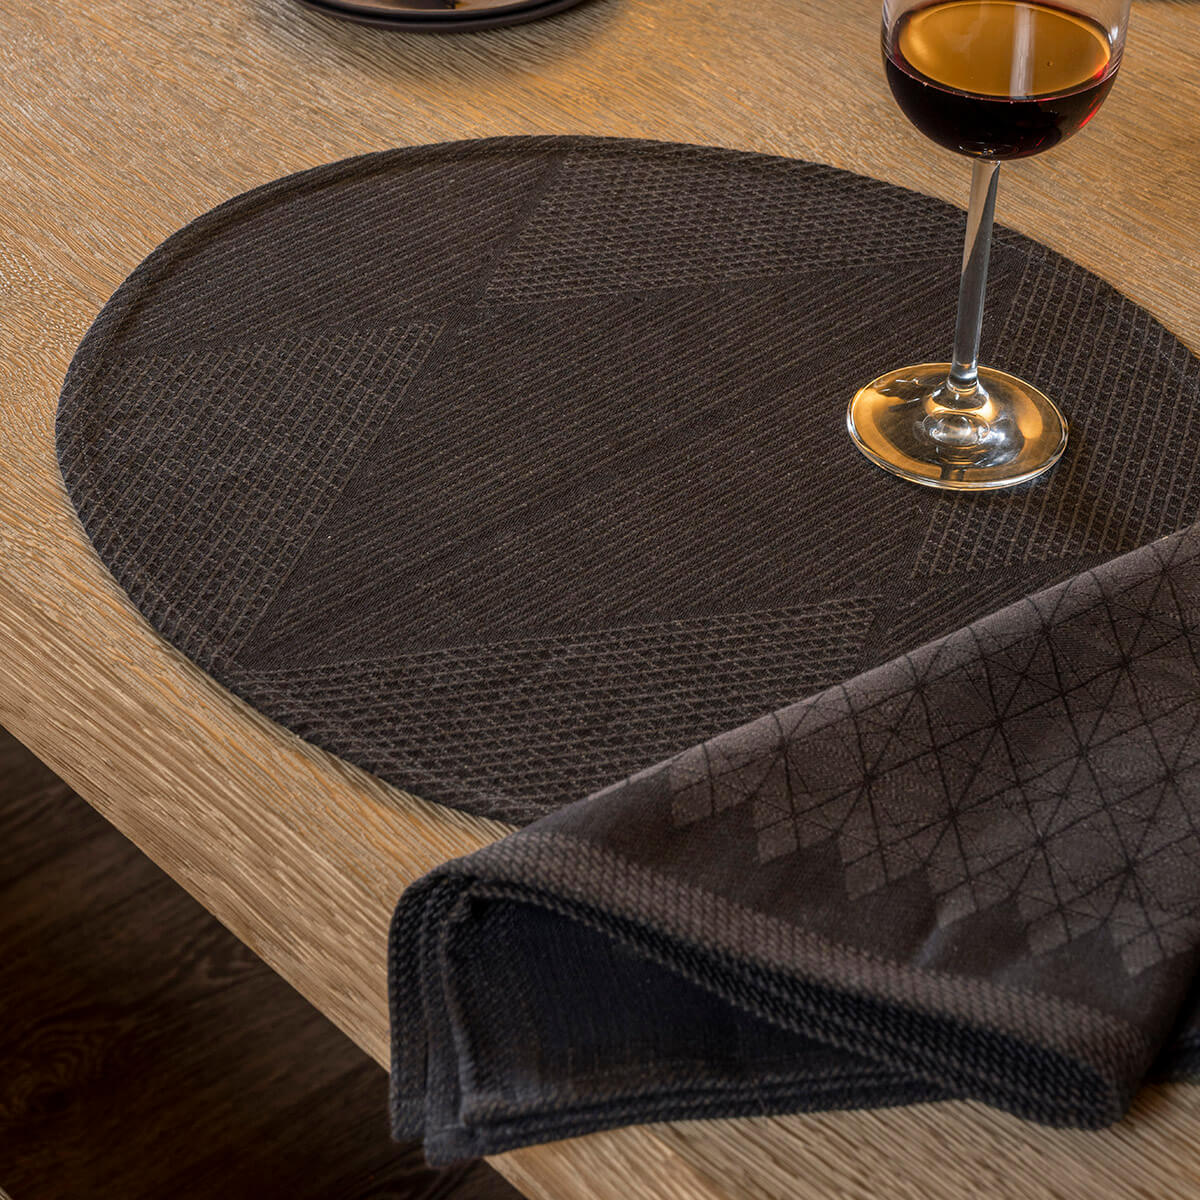 Club Antique Napkin Detail with Round Placemat  - Le Jacquard Francais at Fig Linens and Home